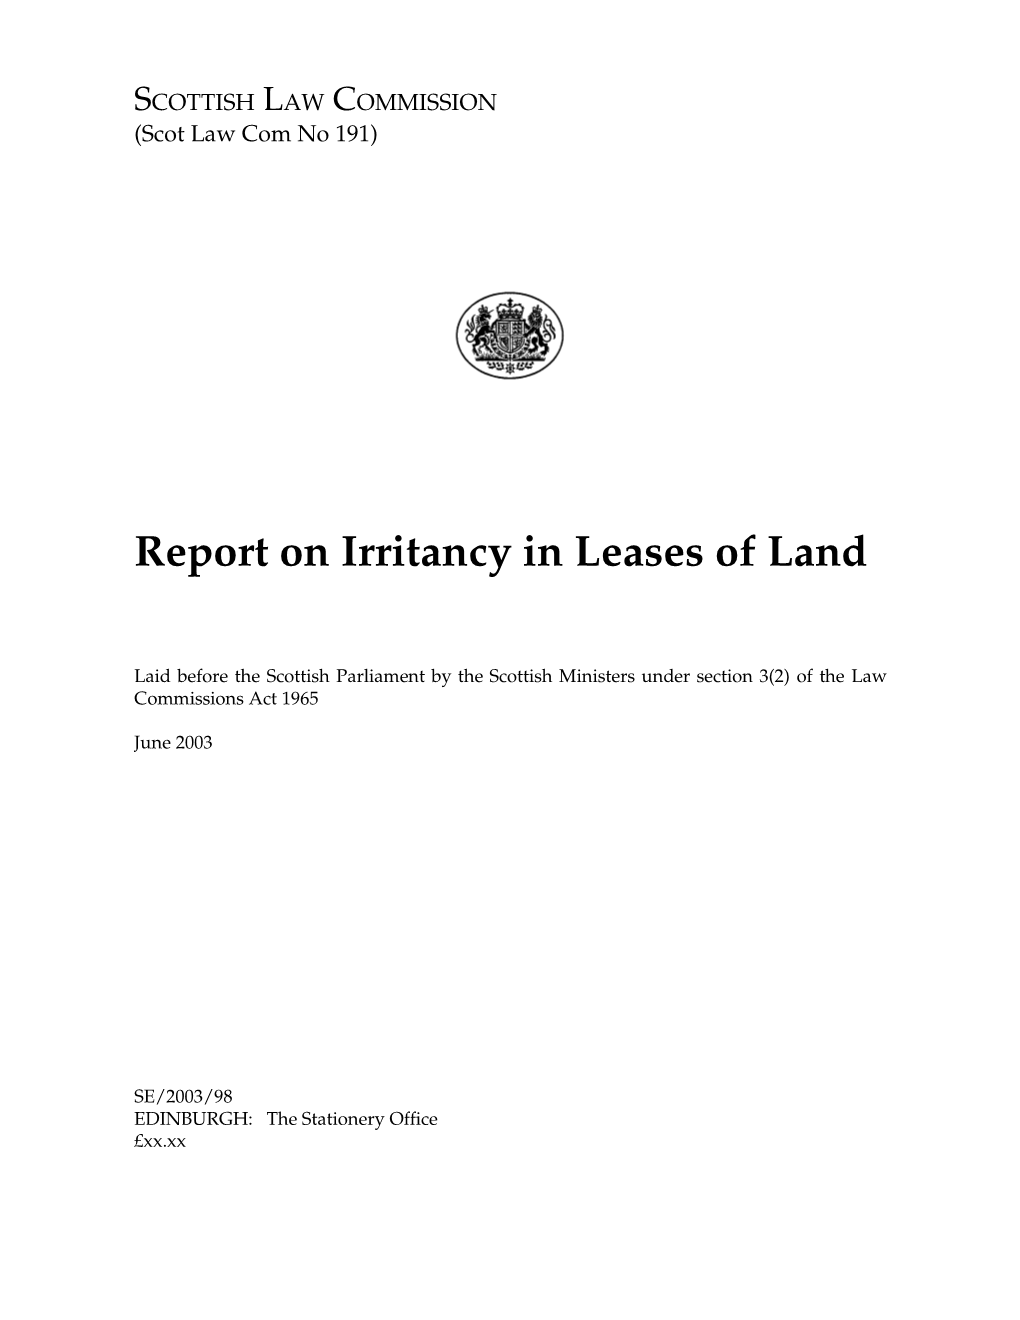 Report on Irritancy in Leases of Land